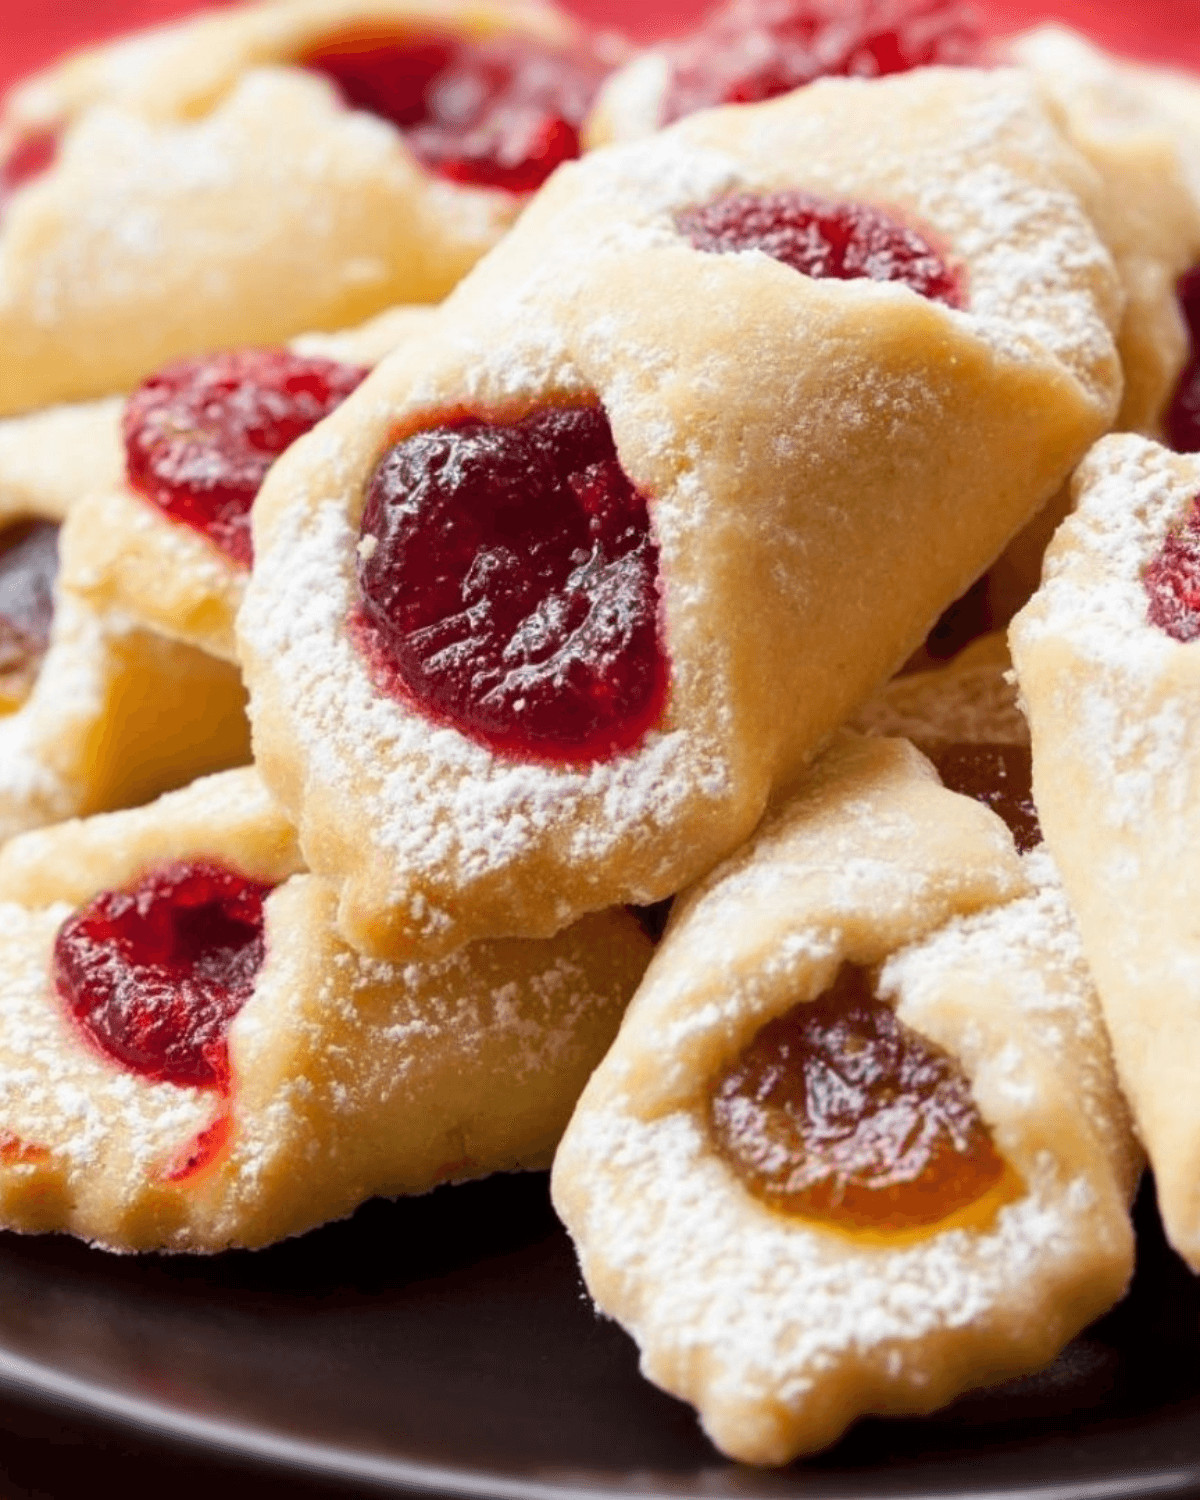 Kolacki {Polish Kolacky Cookies) are traditional Polish cookies made with a cream cheese cookie base and filled with sweet jam.  